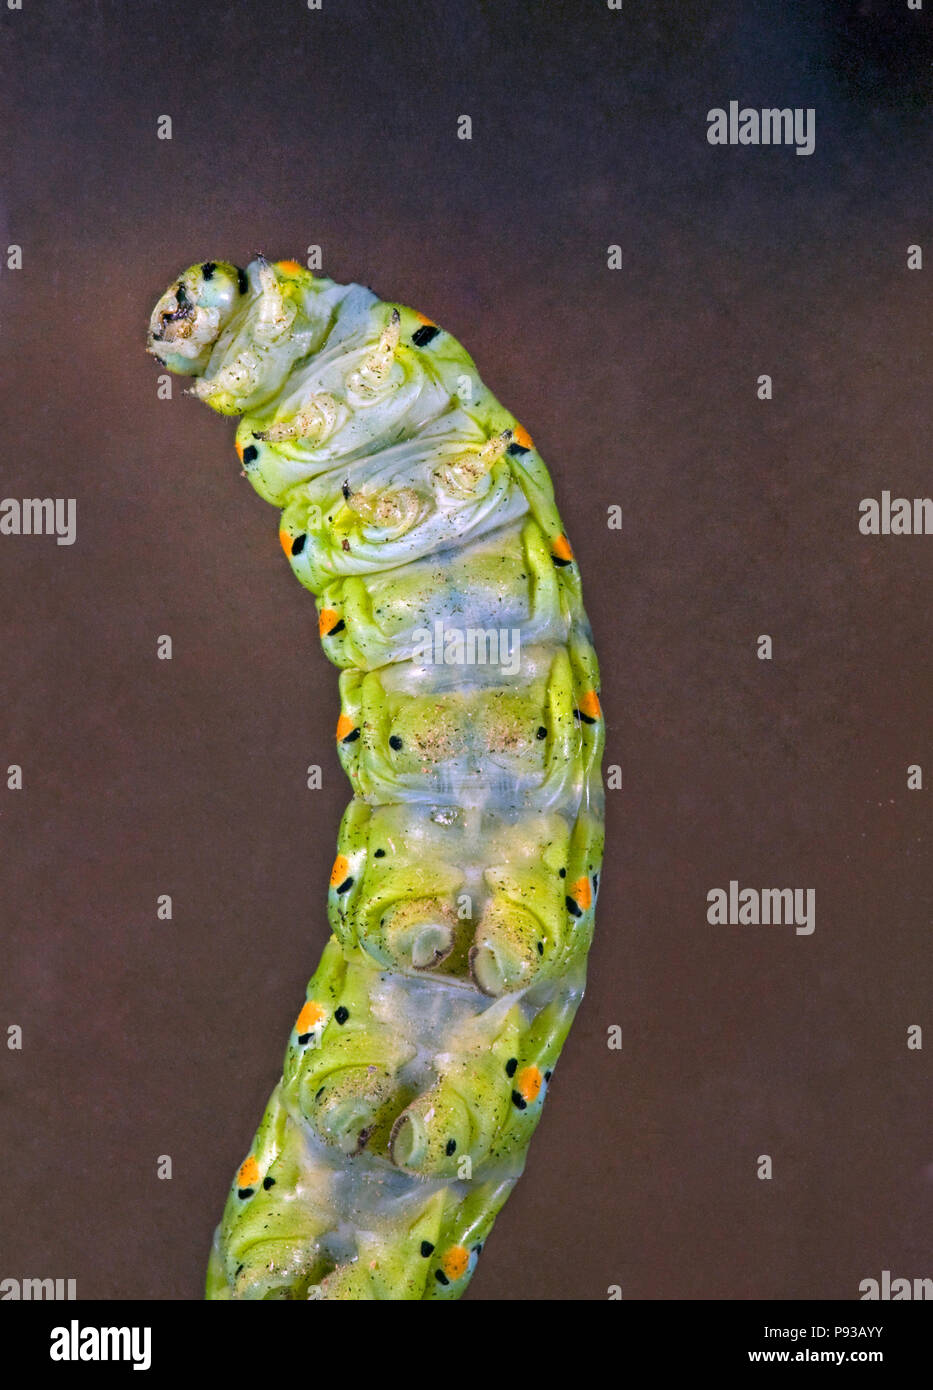 The underside and feet of the caterpillar or larva of an Anise Swallowtail butterfly, Papilio zelicaon, before it pupates. The yellow horns are osmete Stock Photo